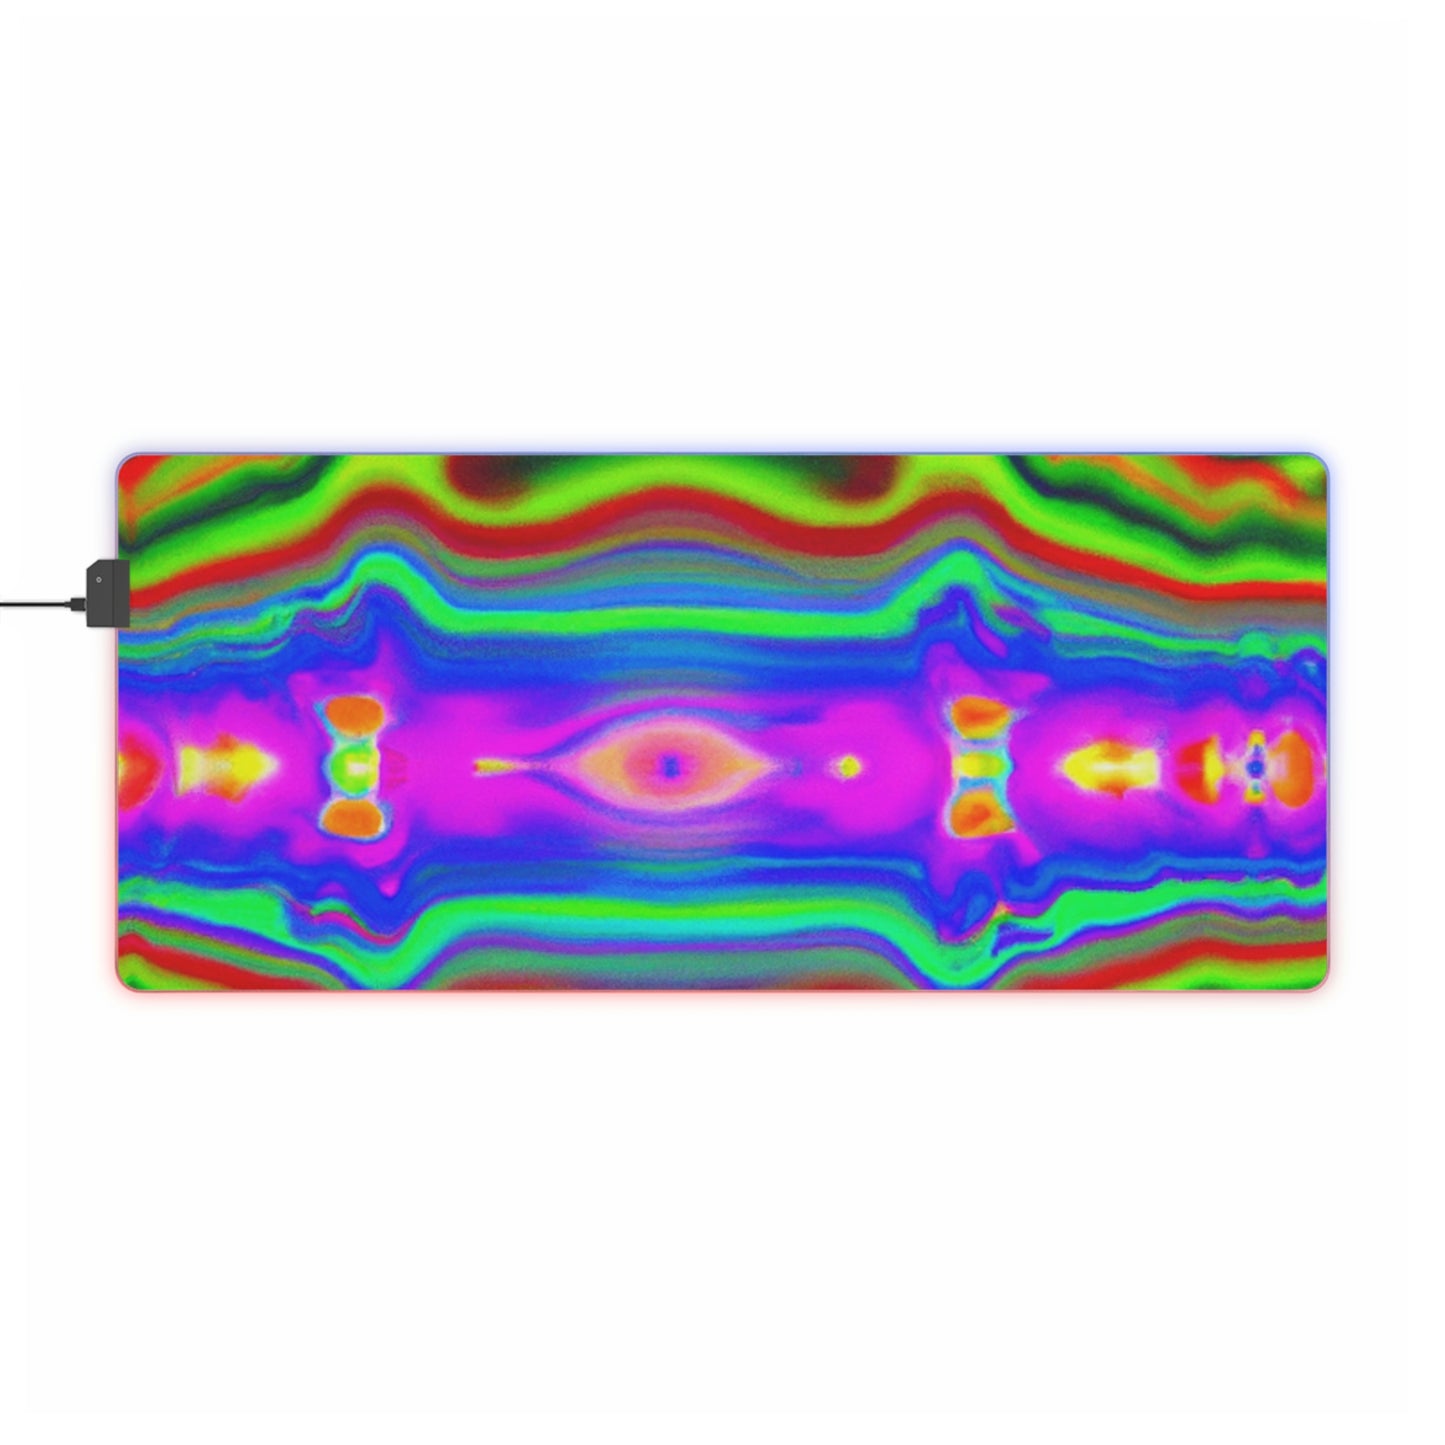 Danny "Sonic Switchblade" Miller - Psychedelic Trippy LED Light Up Gaming Mouse Pad